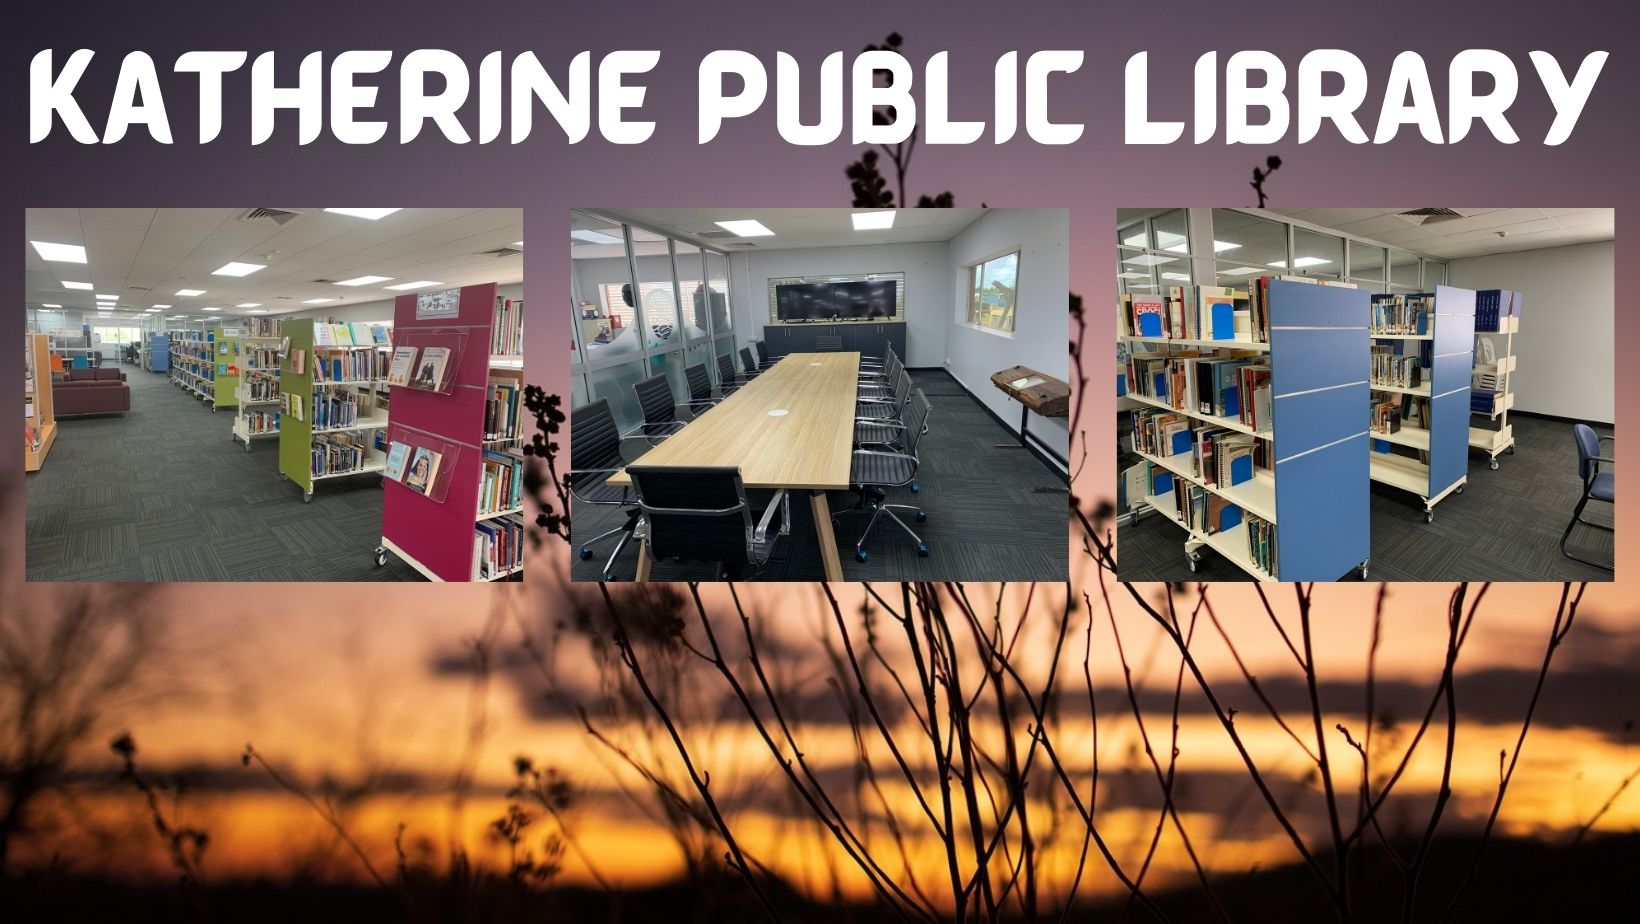 Media Release - Katherine Public Library Operating Hours, Changing in